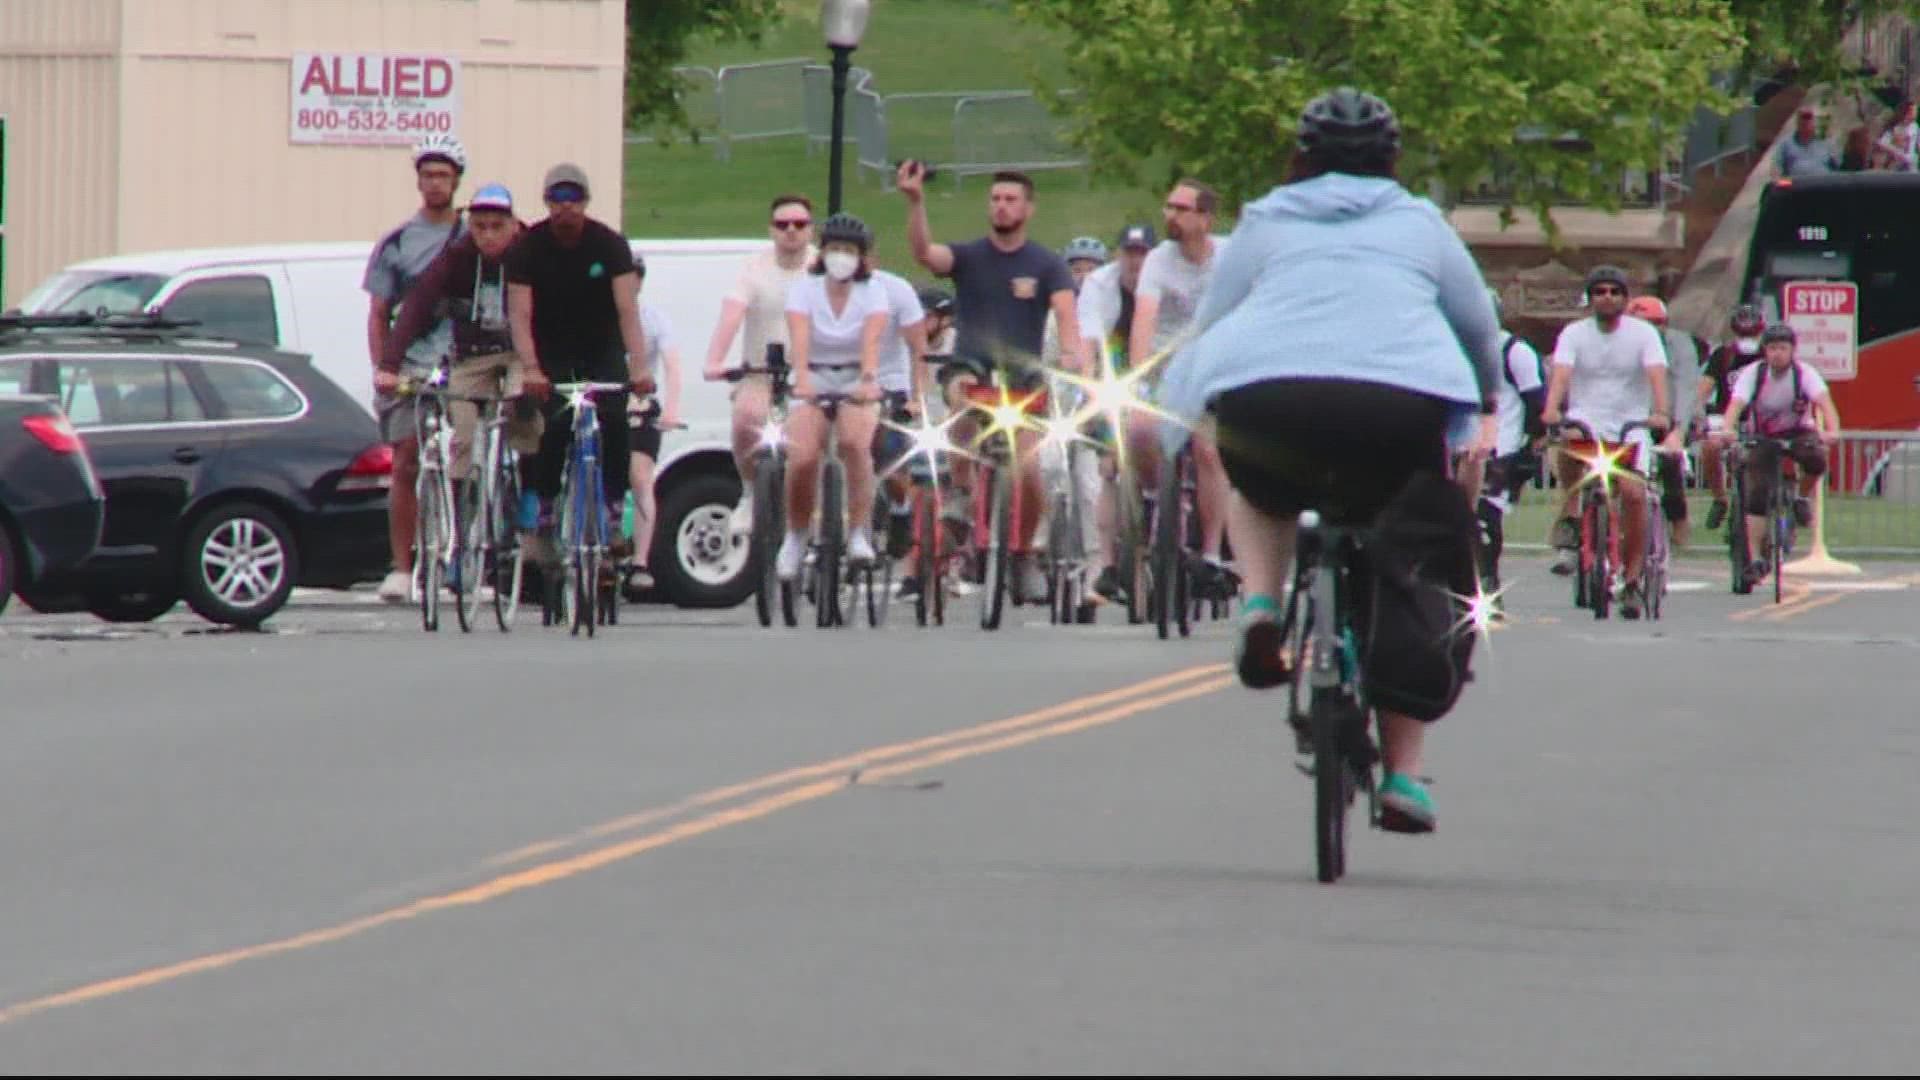 The solemn bike ride honors cyclists killed while riding in DC.